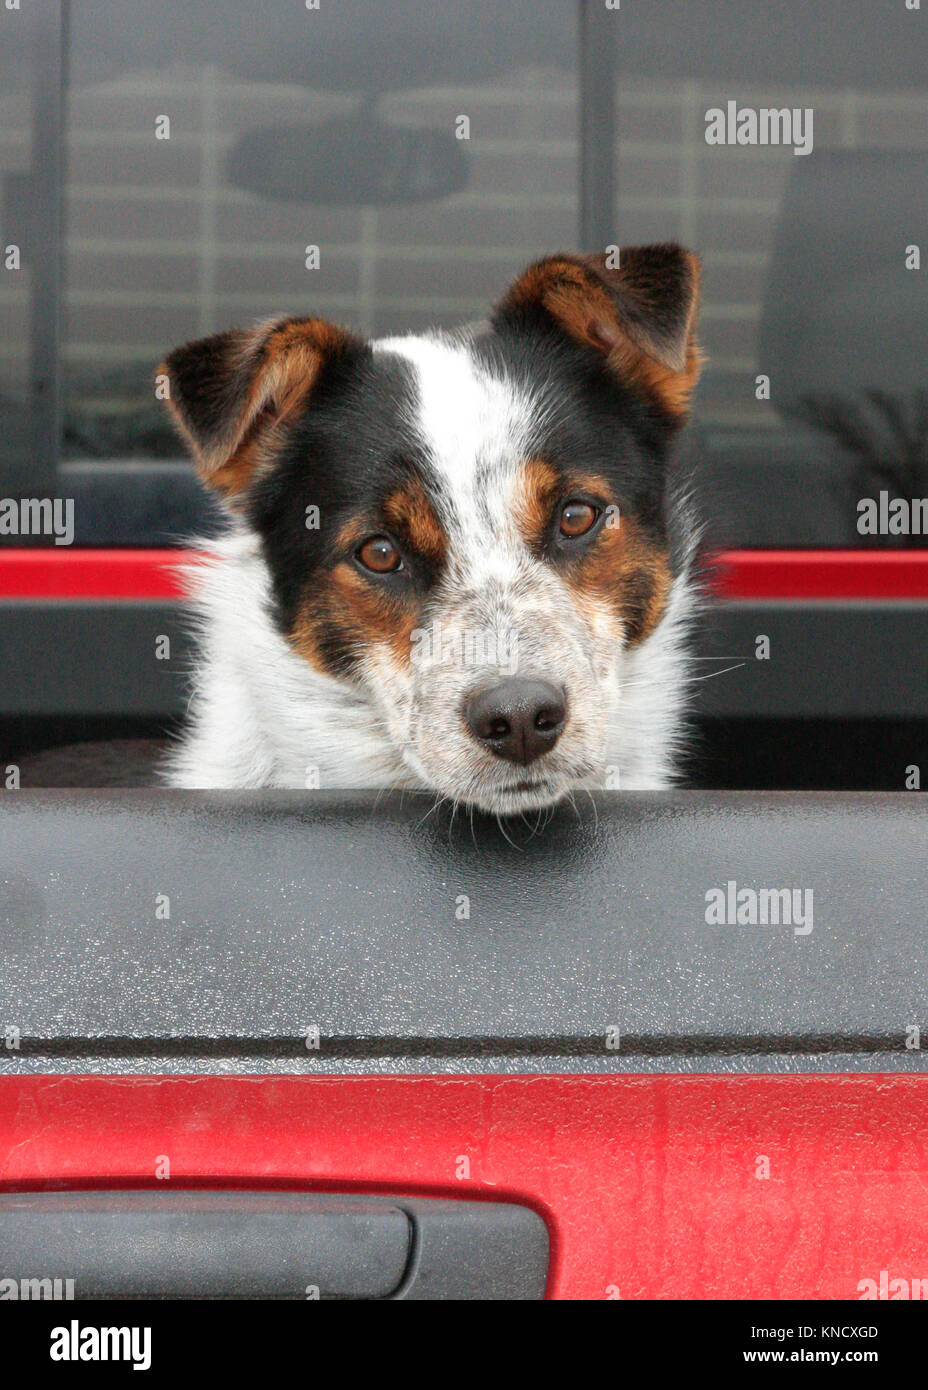 Sad Looking Dog in the Back of a Pickup Truck. 'Why do I always have to stay and watch the truck?' Stock Photo